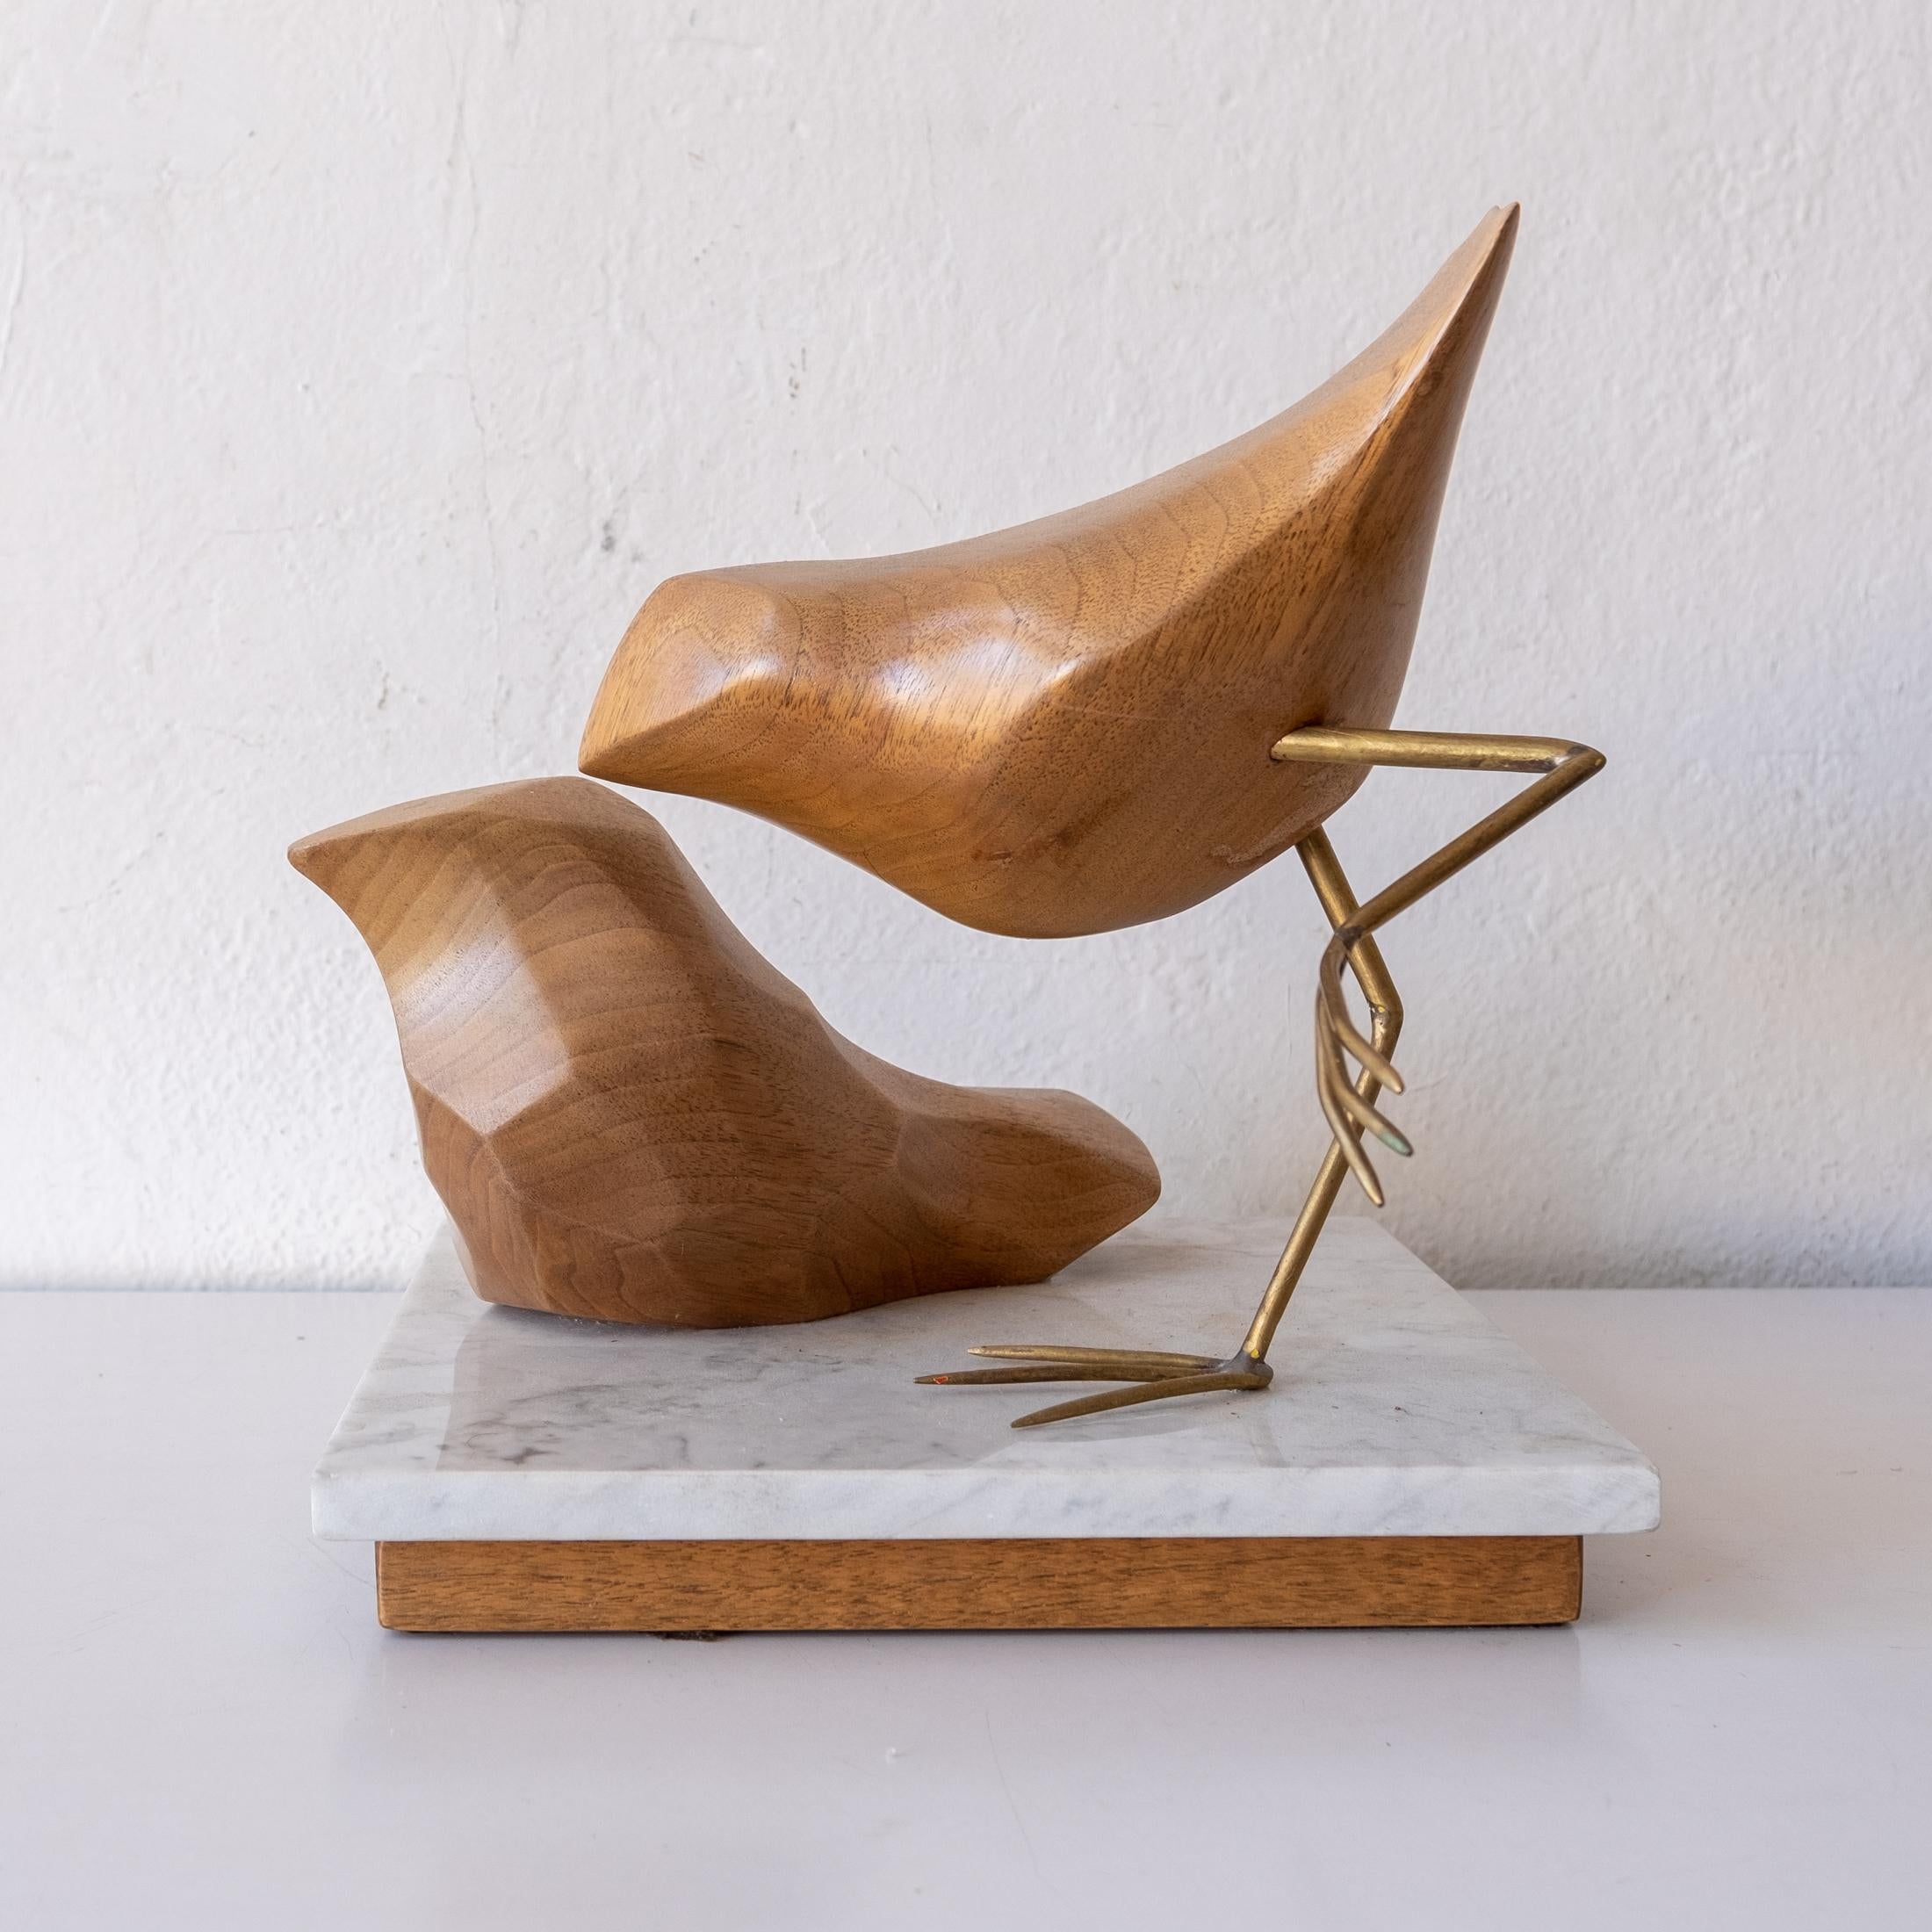 Abstract bird sculpture by artist Val Robbins (1925-2009). Executed at his Rimrock Pennsylvania studio. Wood forms on metal legs, with a marble and wood base. The piece was purchased directly from the artist's estate. Signed on the base. USA,